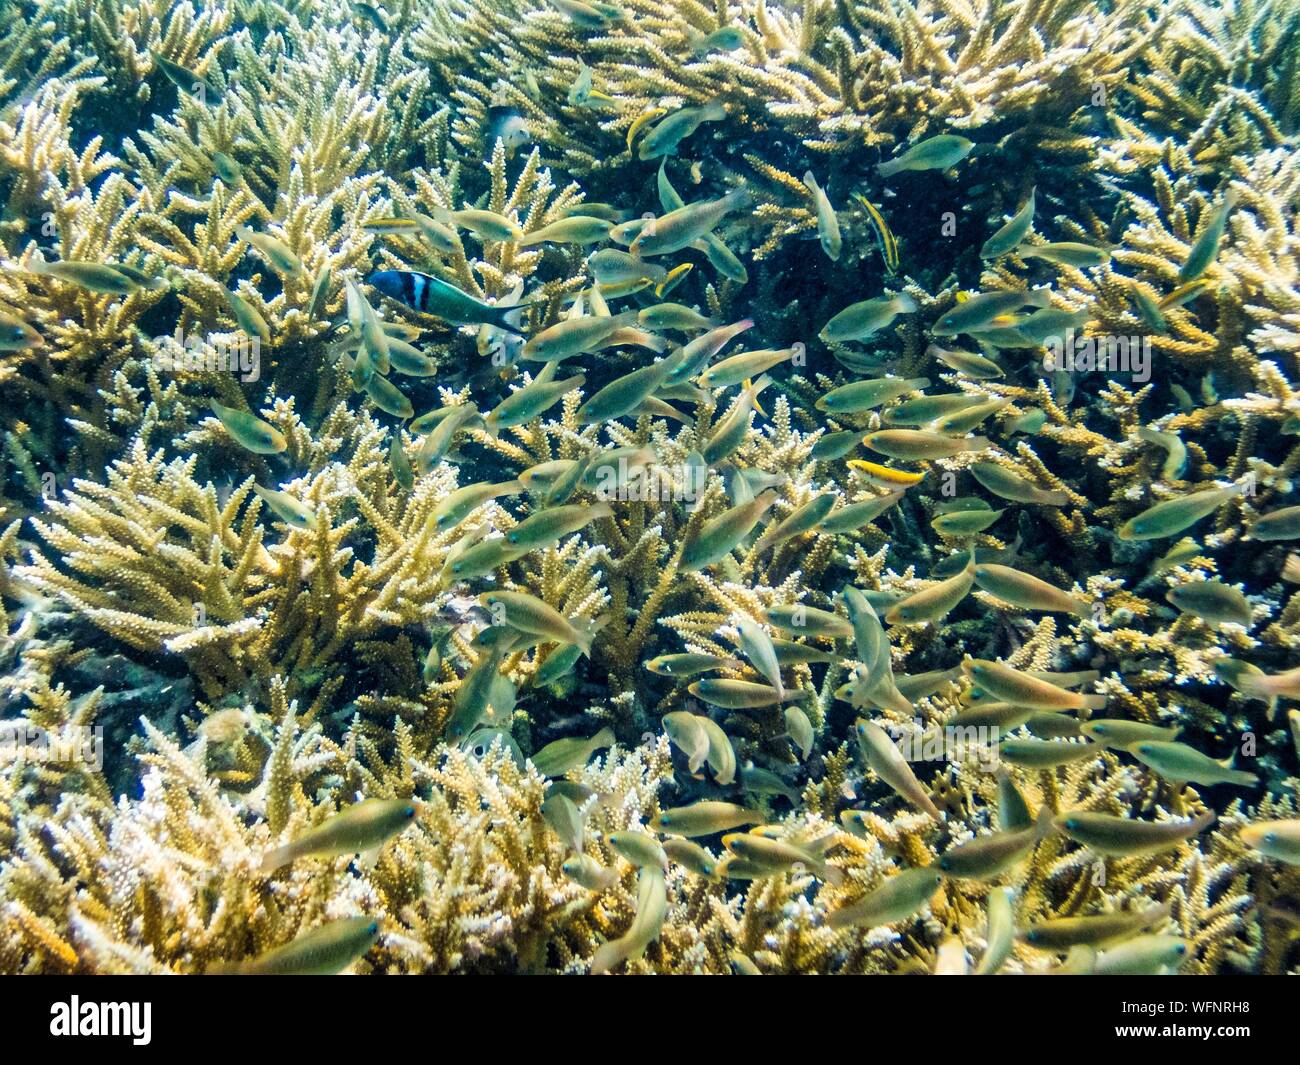 France, Caribbean, Lesser Antilles, Guadeloupe, Grand Cul-de-Sac Marin, heart of the Guadeloupe National Park, snorkeling in the lagoon around the Fajou Islet, here a school of tropical fishes in a coral forest Deer horn (Acropora cervicornis) Stock Photo